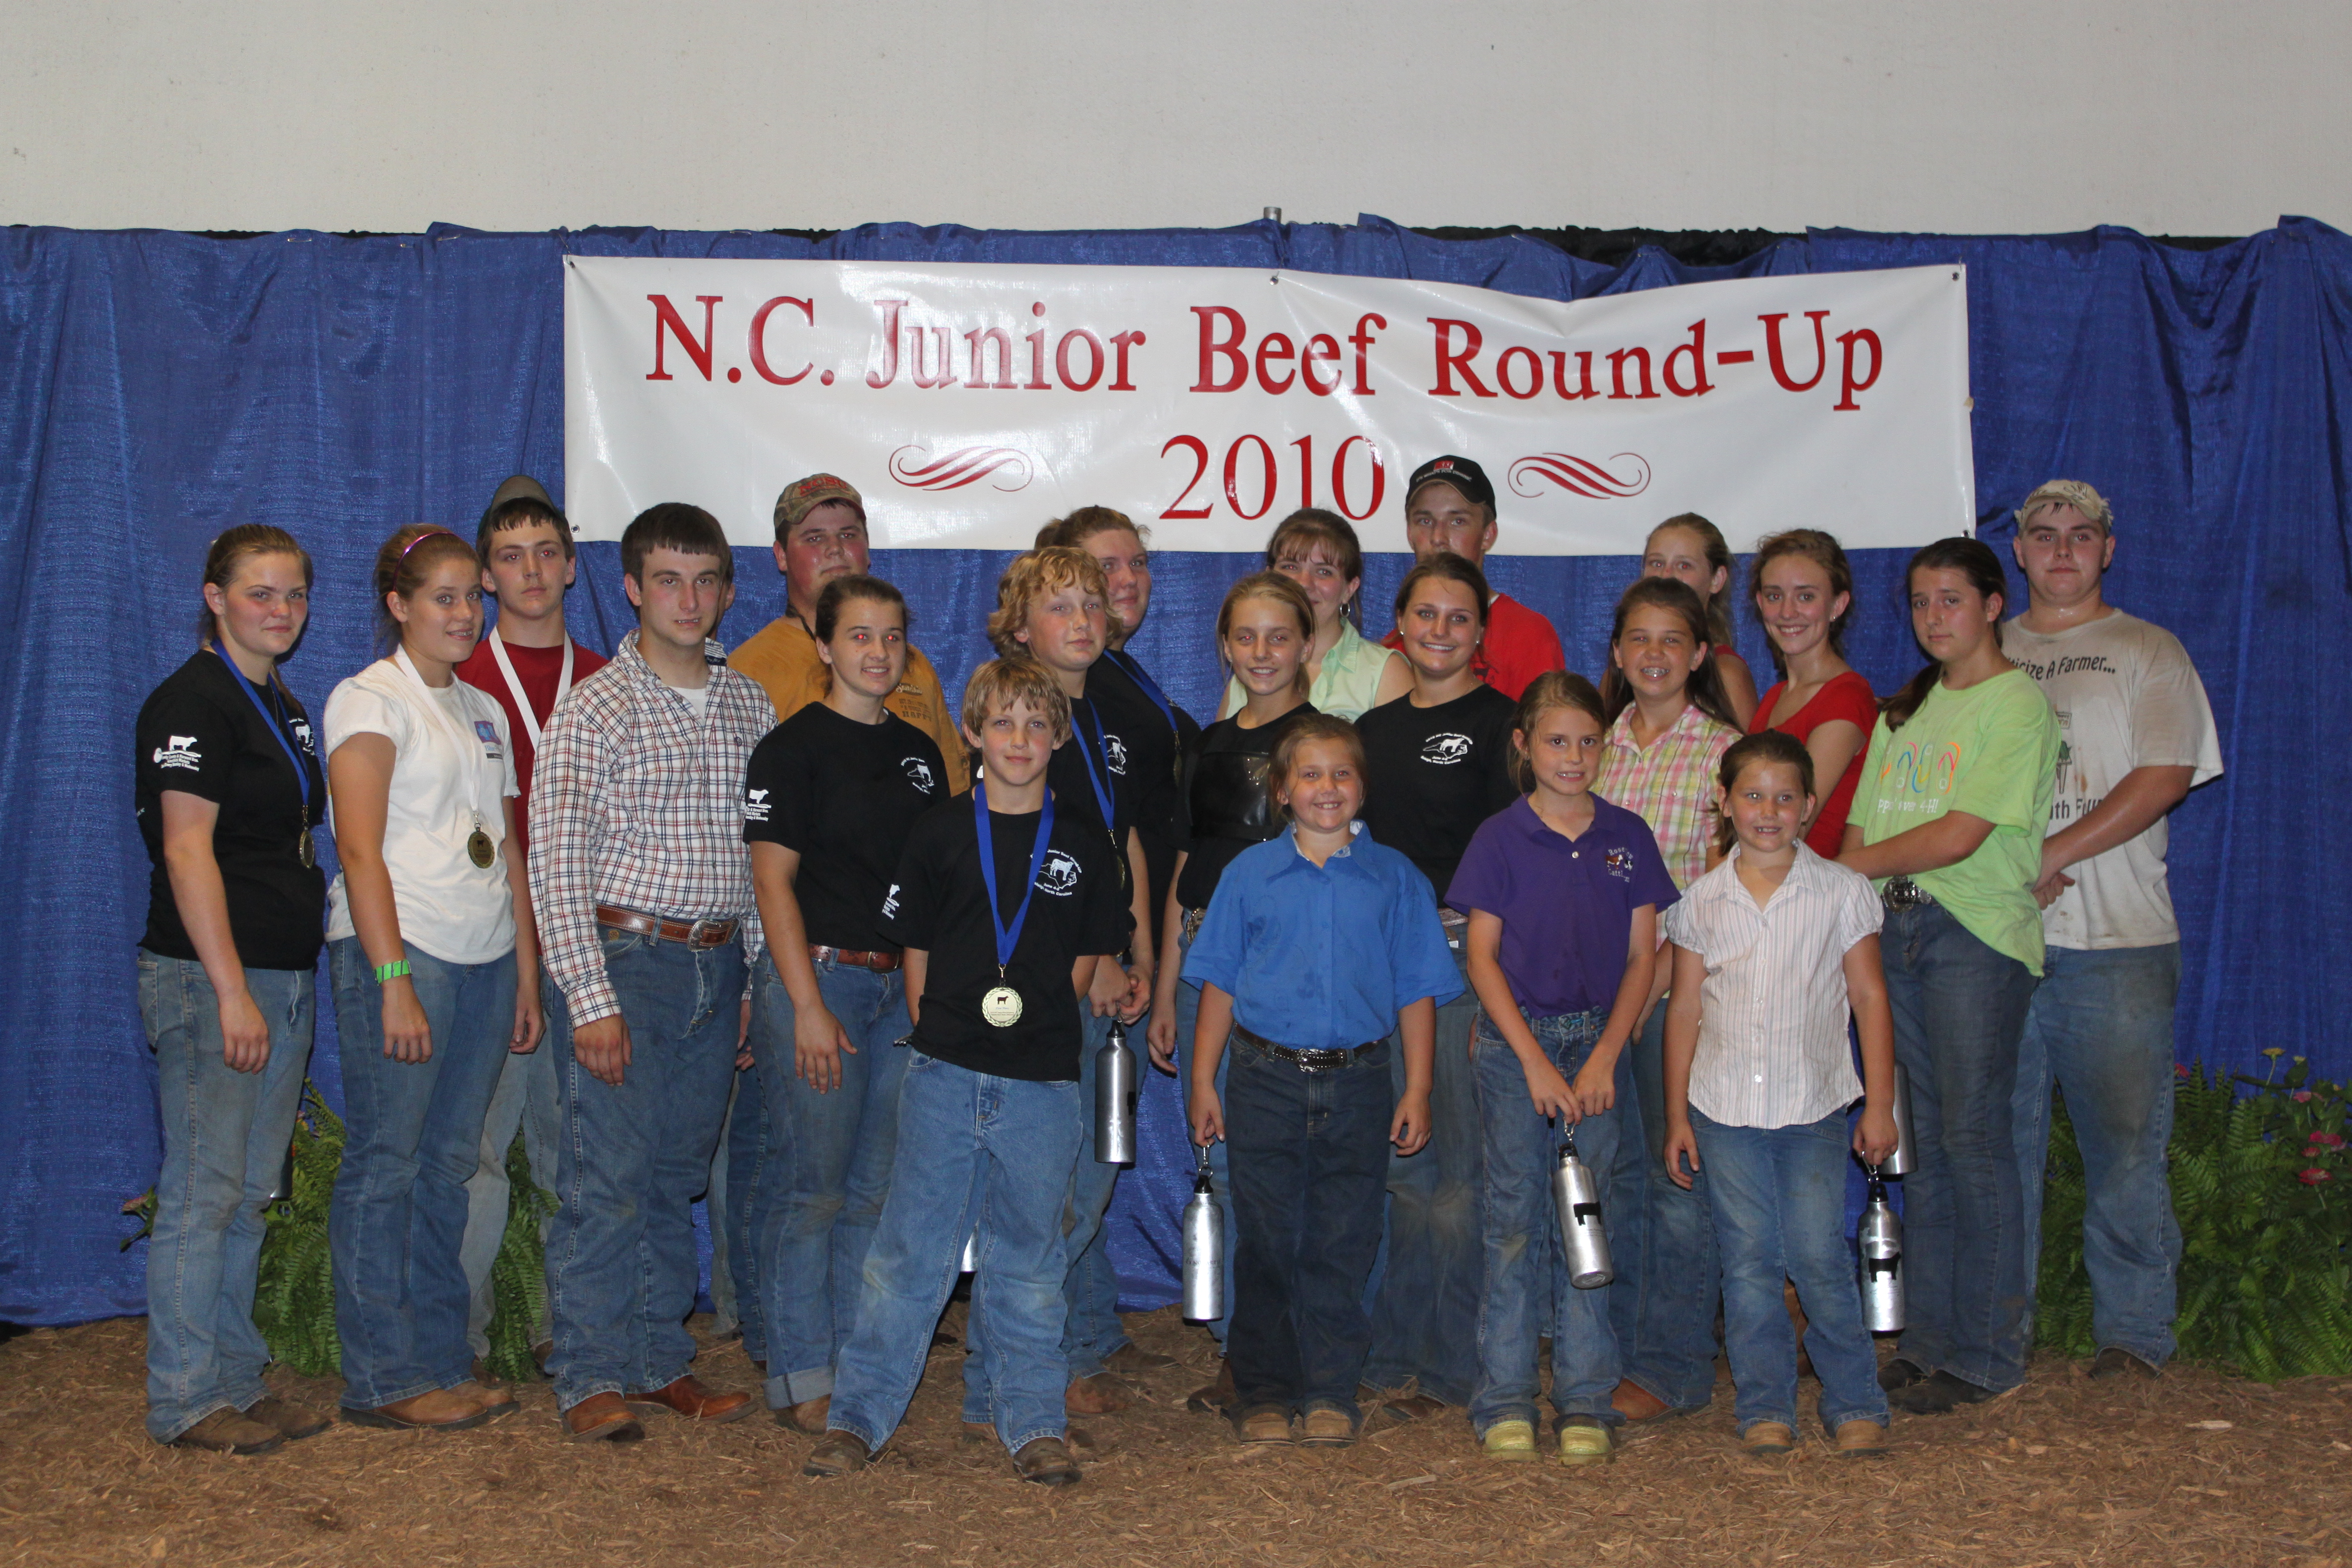 Winners of the N.C. Junior Beef Round-Up in 2010 posing with their medals.